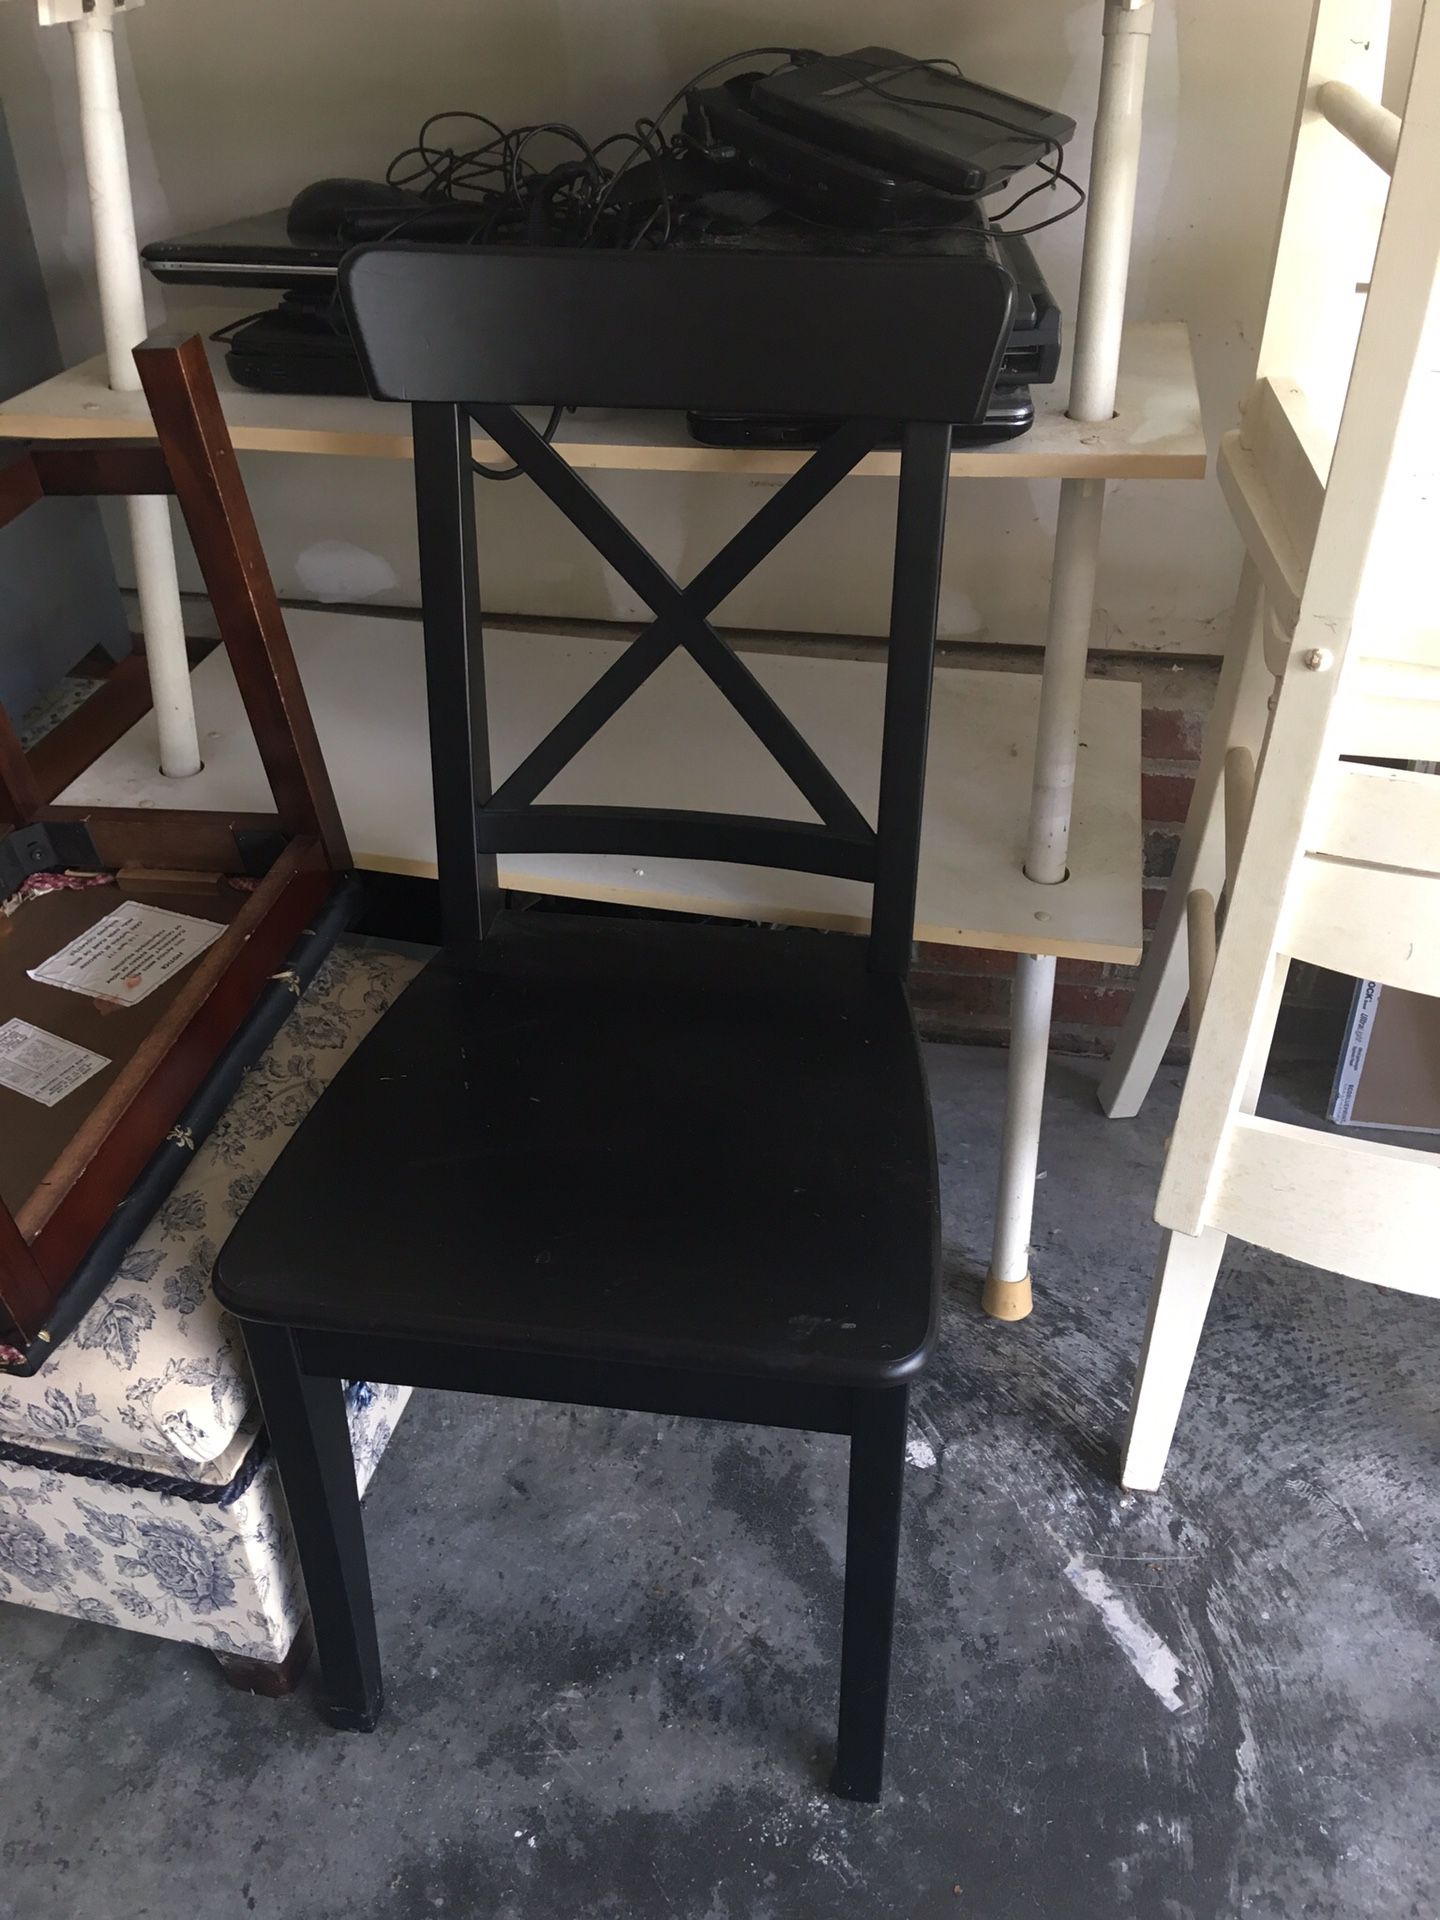 4 black chairs, sturdy no major scratches. Asking $80 for all